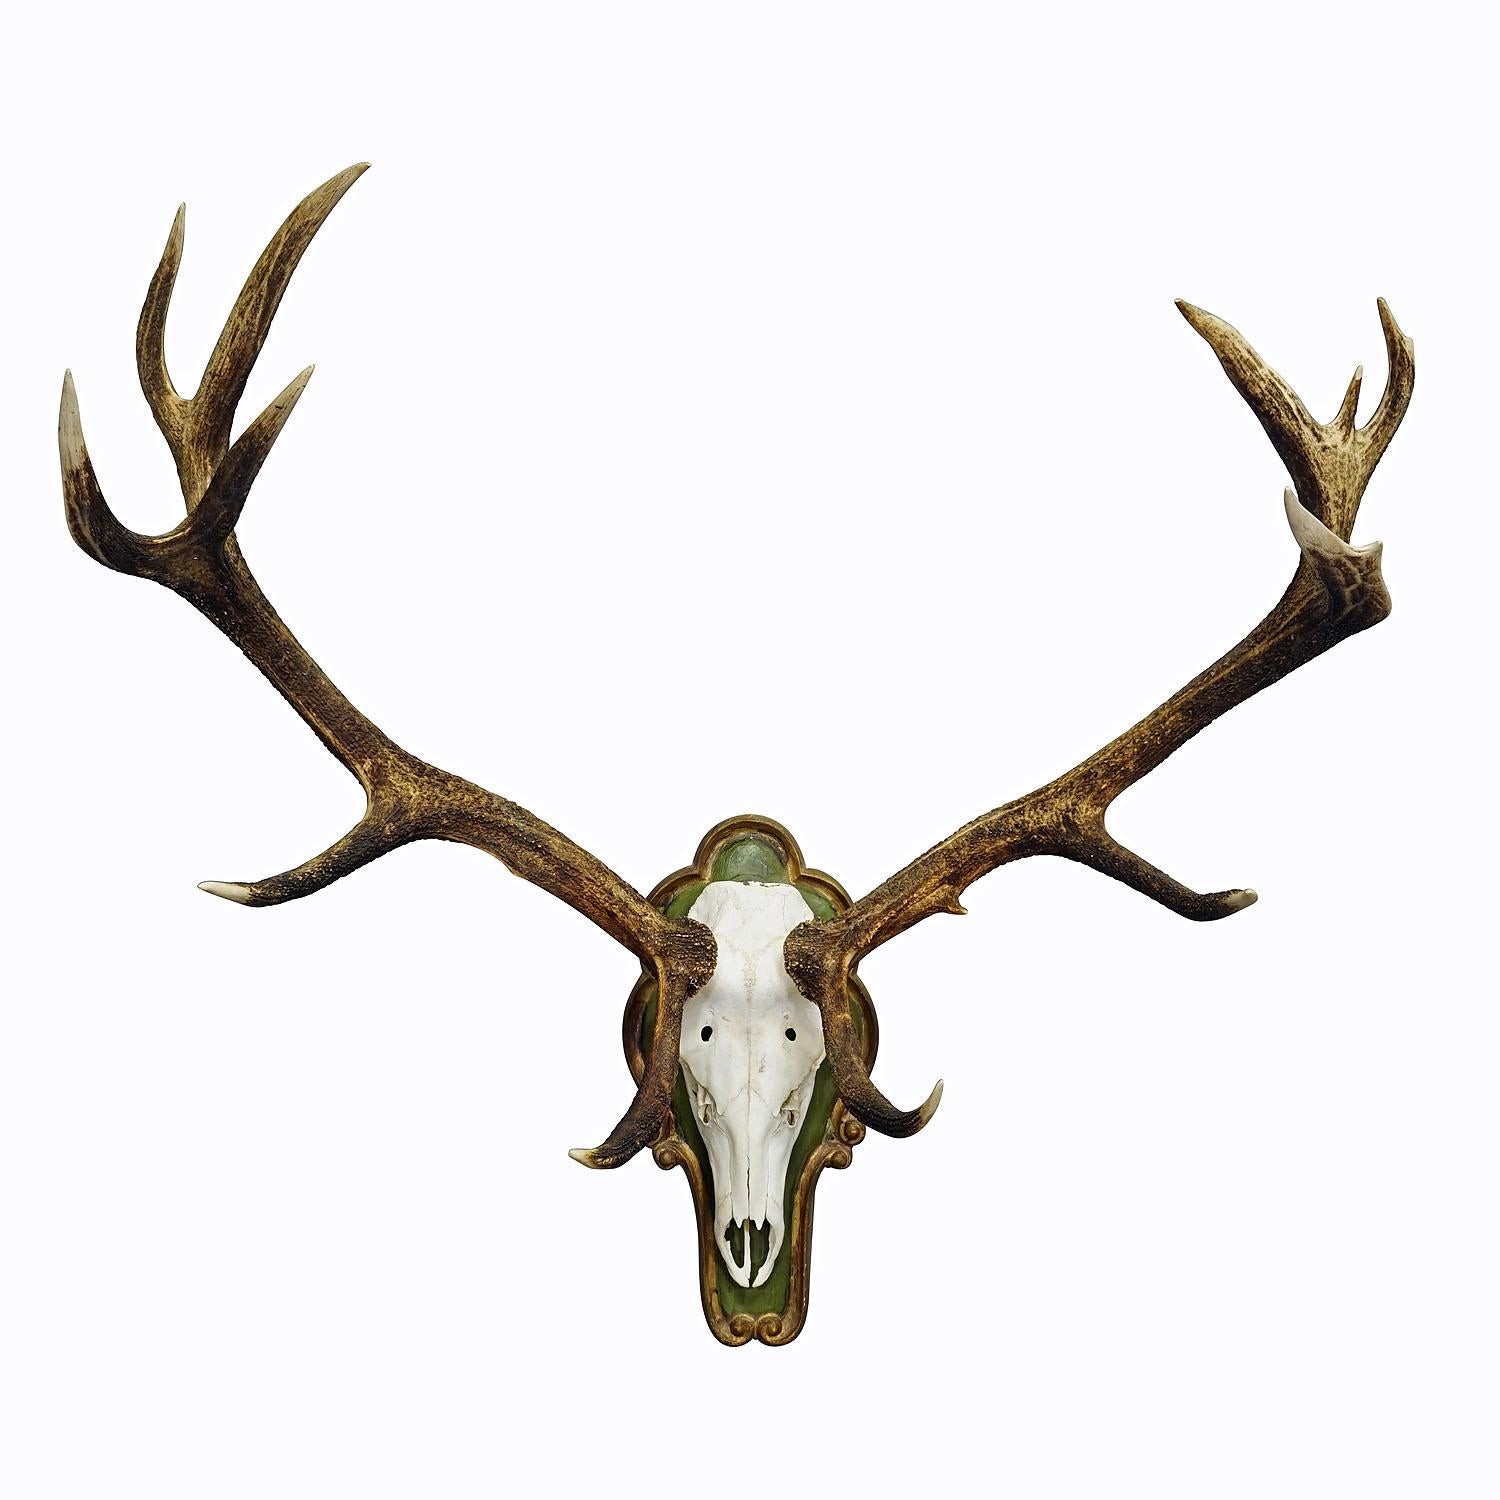 Capital Black Forest 16 Pointer Deer Trophy on Wooden Plaque

A very large 16 pointer deer (Cervus elaphus) trophy from the Black Forest. The trophy was shot around 1950s. The large antlers are mounted on a carved and painted wood plaque. Weight